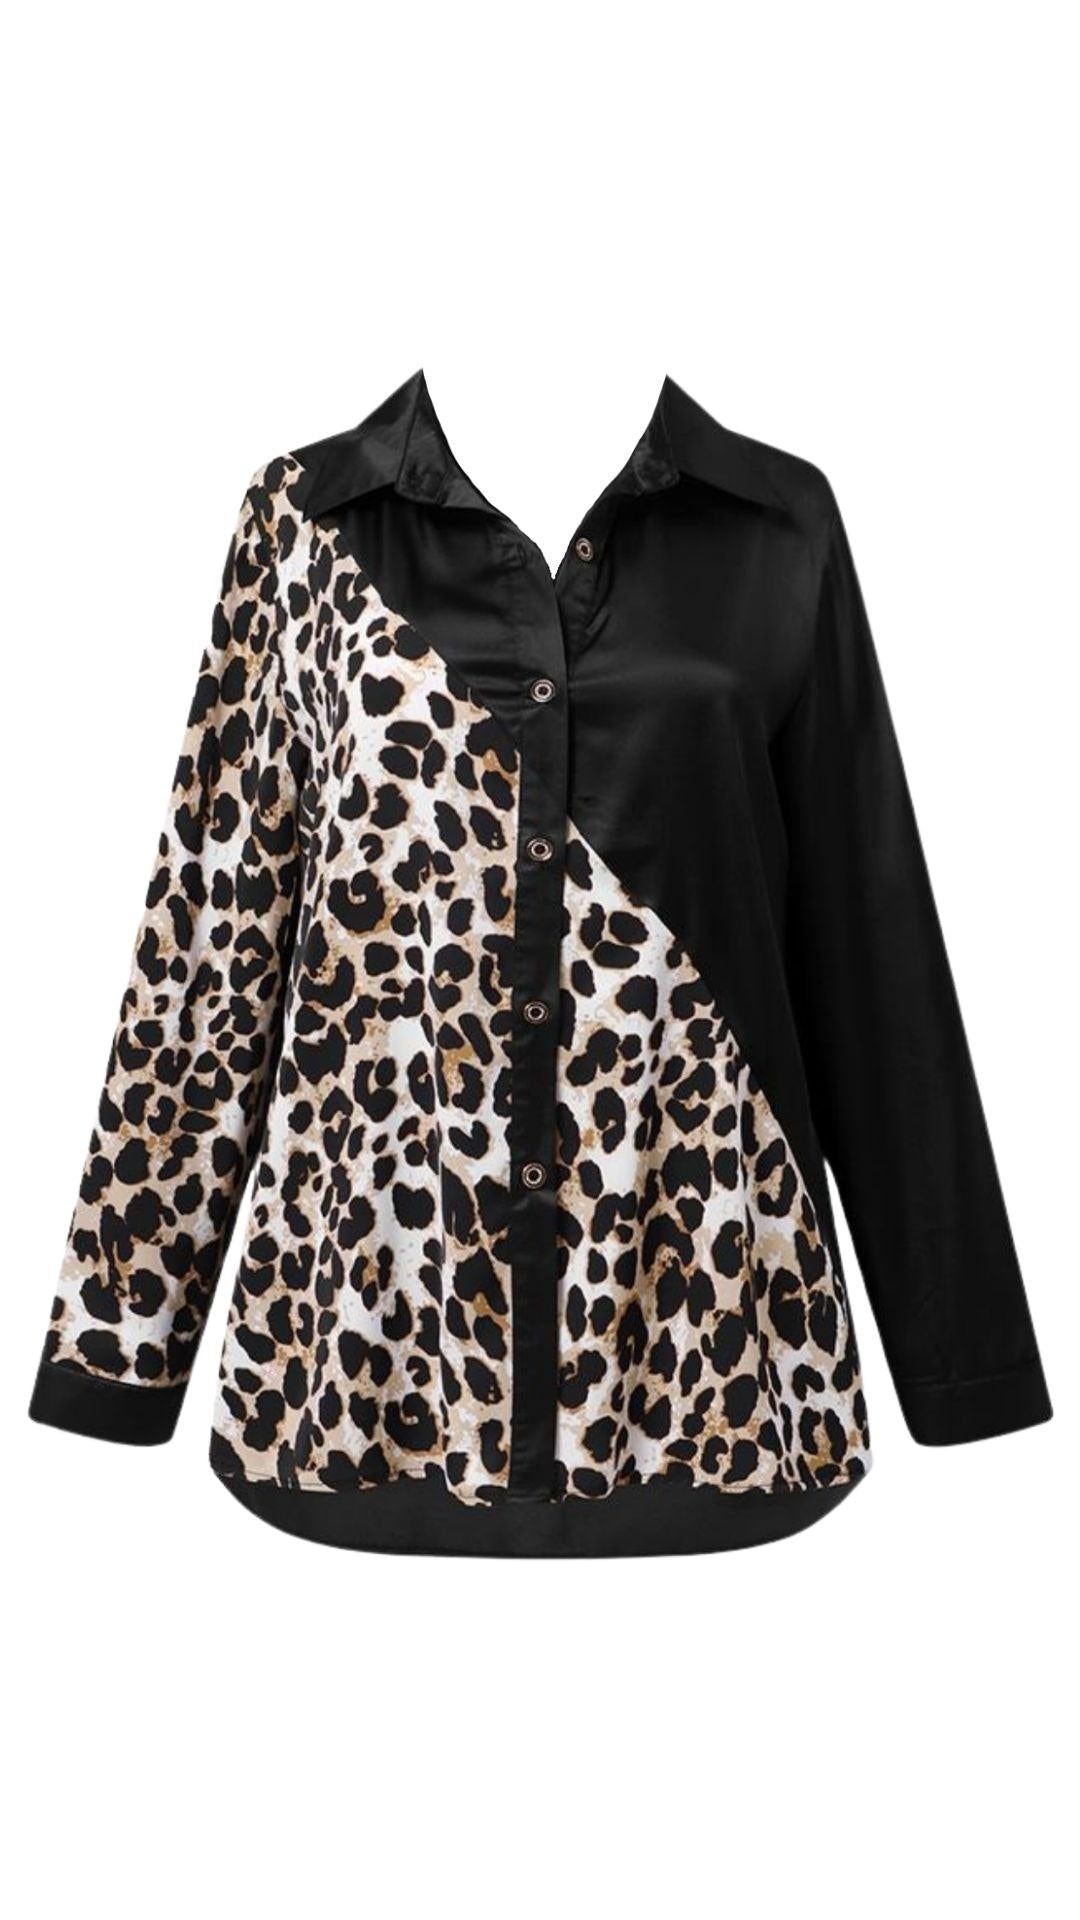 Black and Leopard Shirt - Amelry